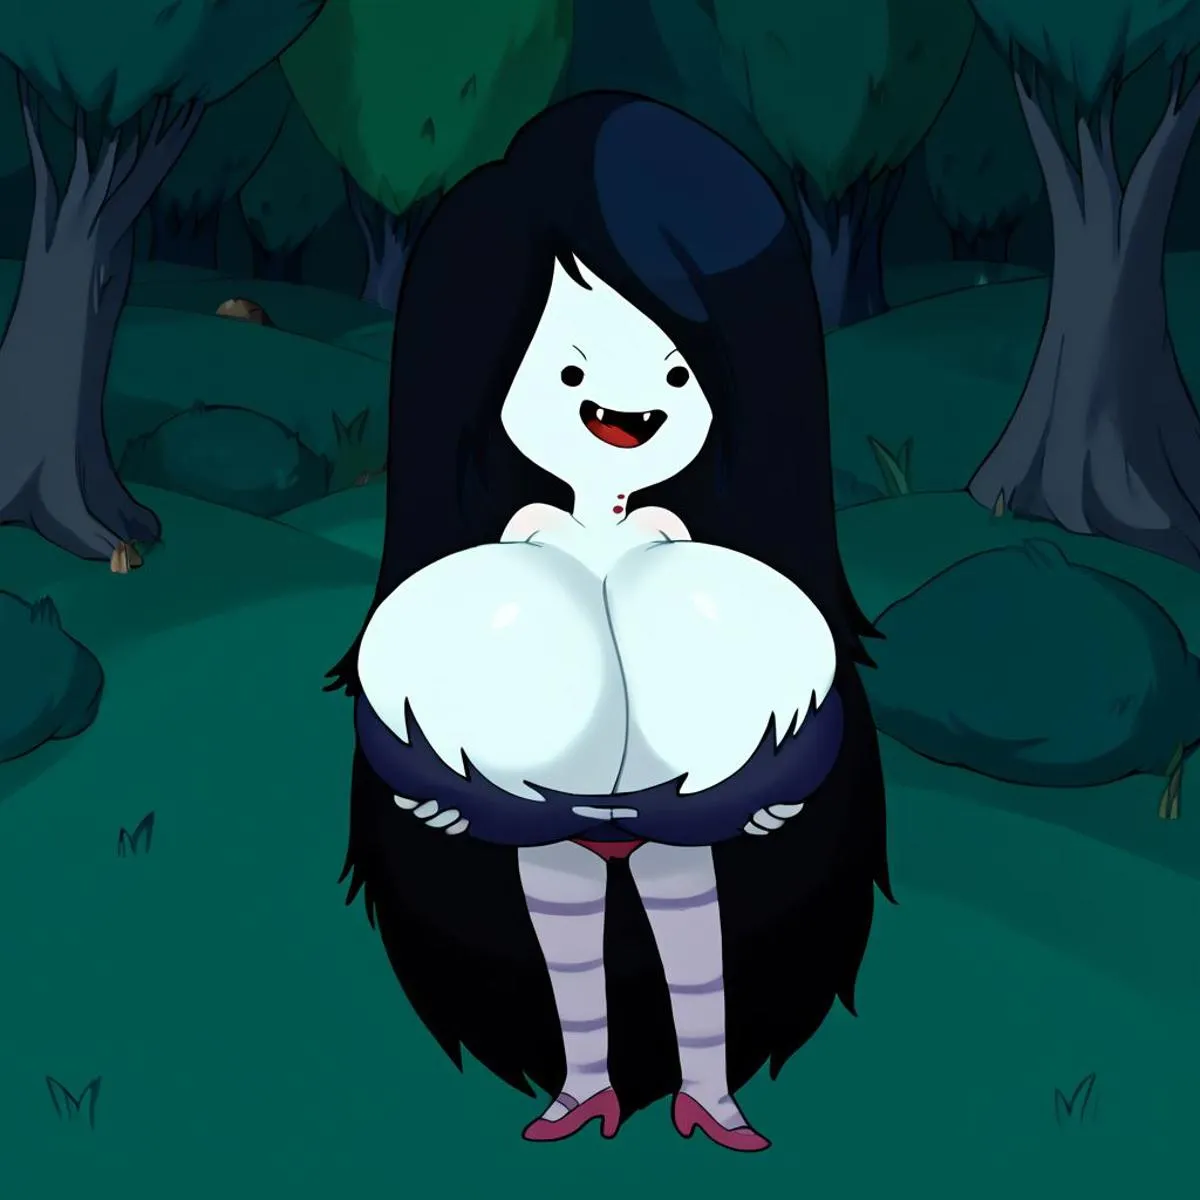 Cartoon vampire woman with large breasts in a dark forest background. AI generated image using Stable Diffusion.